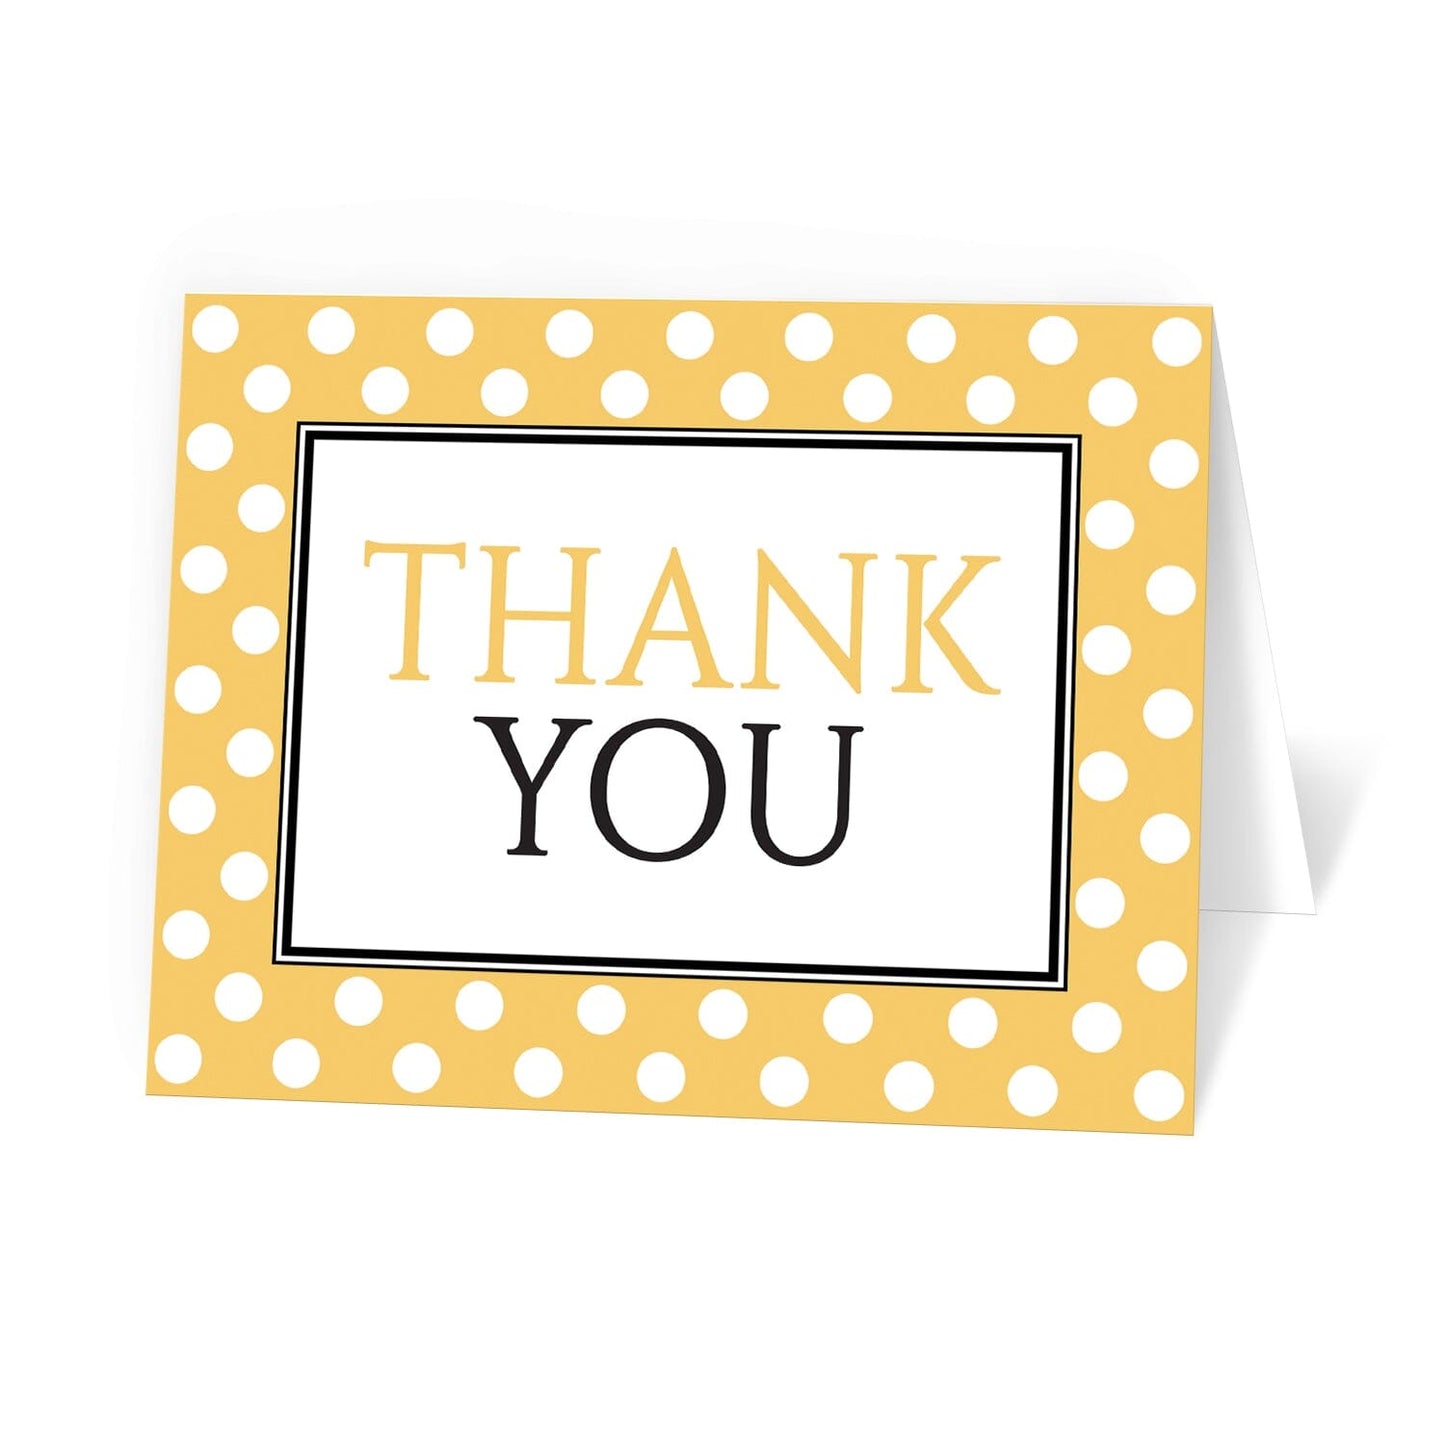 Polka Dot Yellow Black and White Thank You Cards at Artistically Invited.